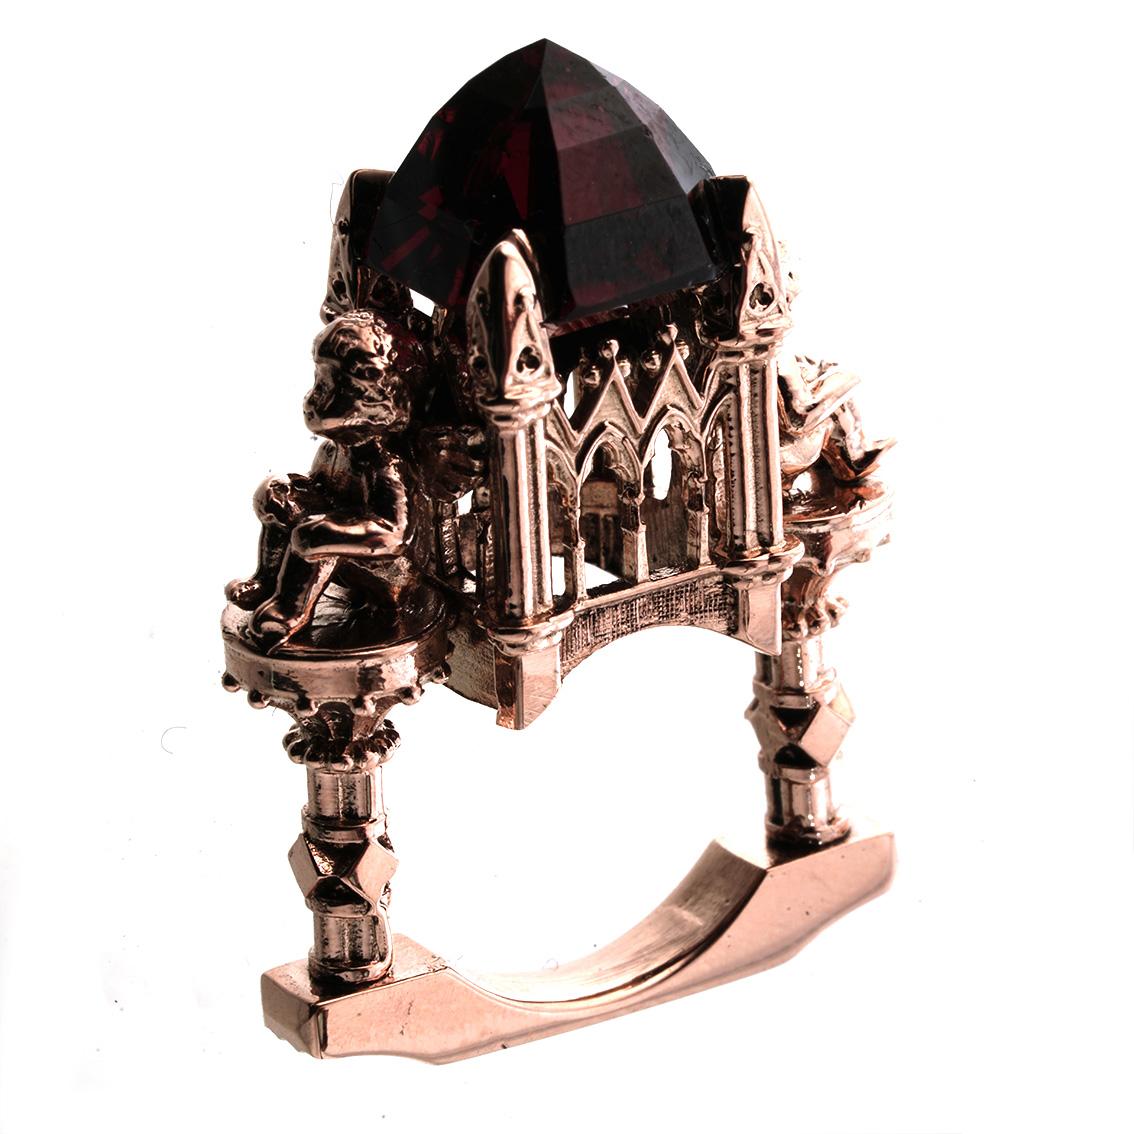 The Omniscient Soul Ring is a luxurious masterpiece. This enthralling ring is one of a kind and fits a size 4 1/4 (Australian & British Size I).

Handcrafted in 9ct rose gold this vibrant ring features a 11.5mm x 11mm garnet. The incredible stone is